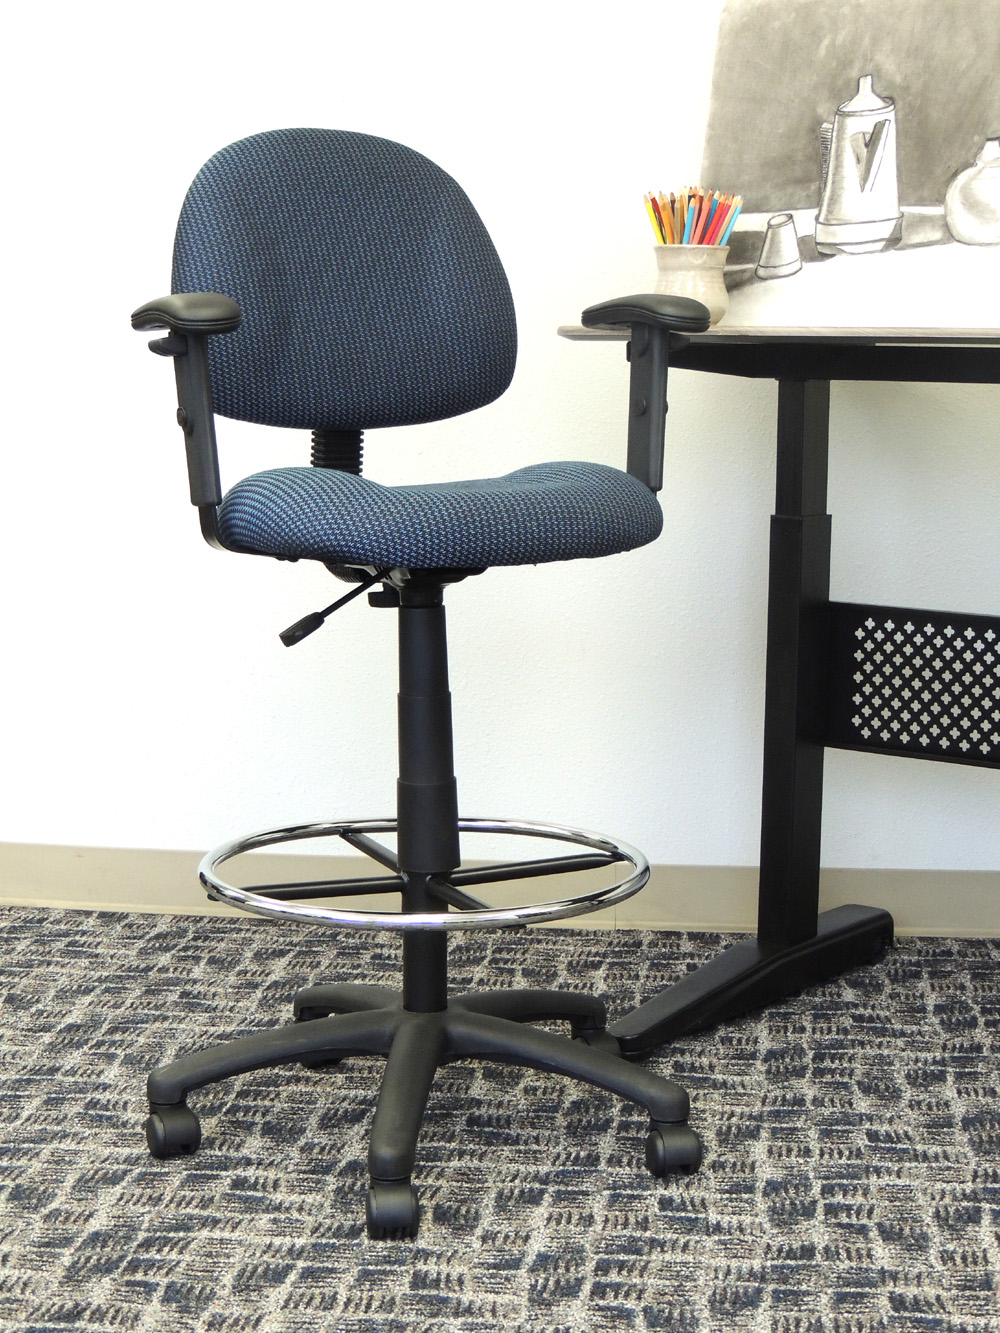 Details about   Mesh Back Drafting Office Desk Chair Pneumatic Seat Adjustable Height Footrest ❤ 